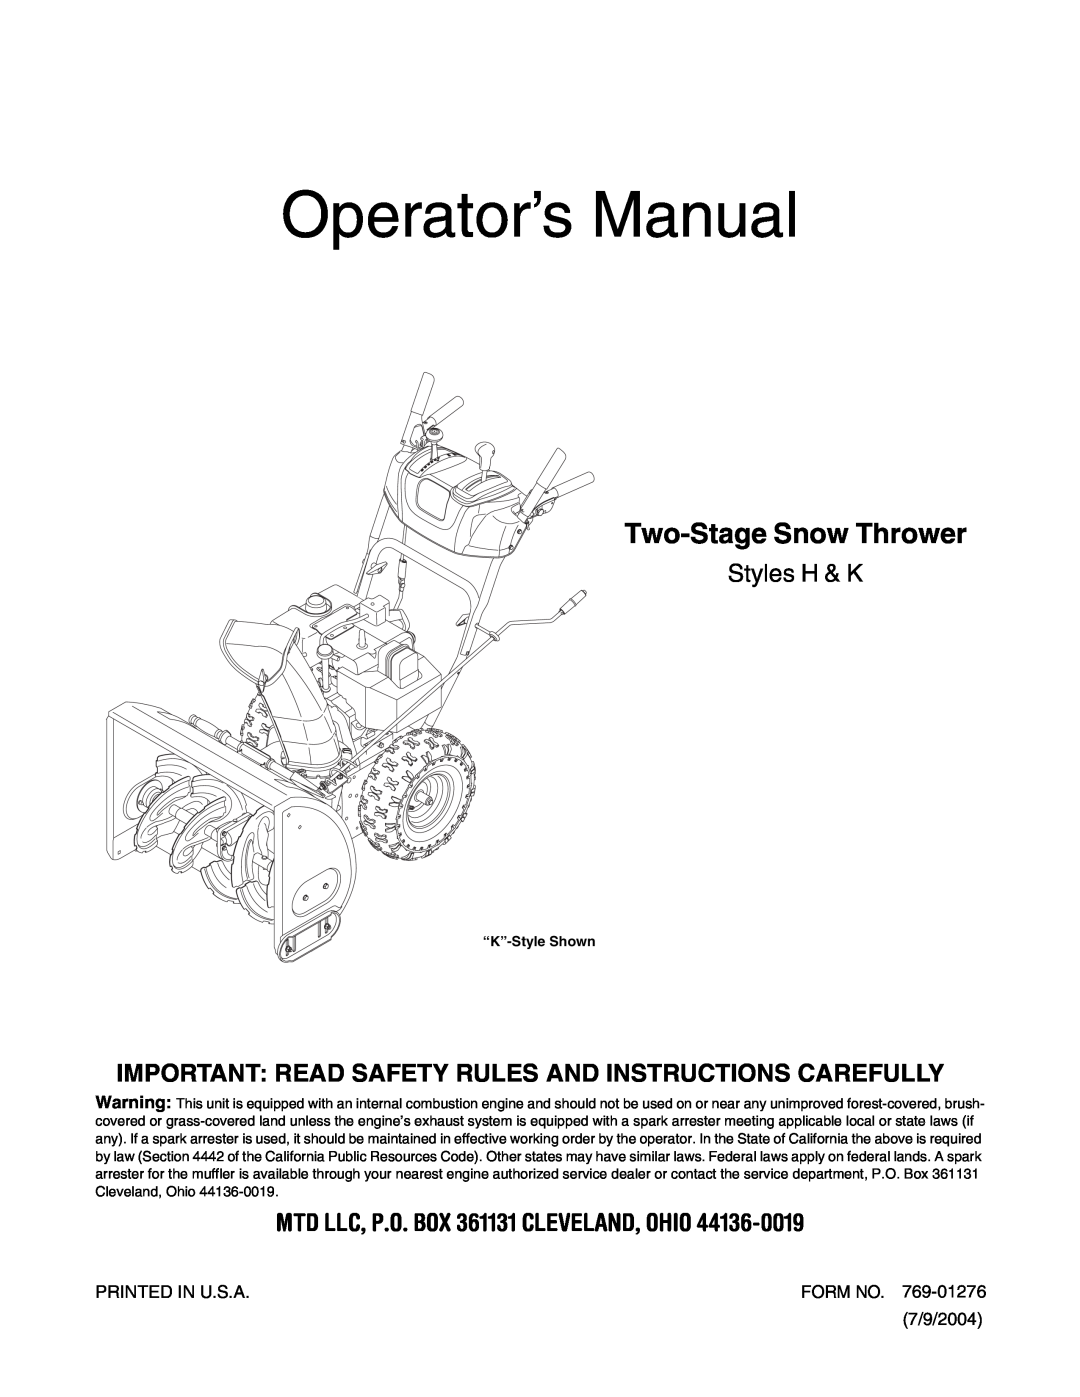 MTD L-Style manual MTD LLC, P.O. BOX 361131 CLEVELAND, OHIO, Operator’s Manual, Two-Stage Snow Thrower, Styles H & K 